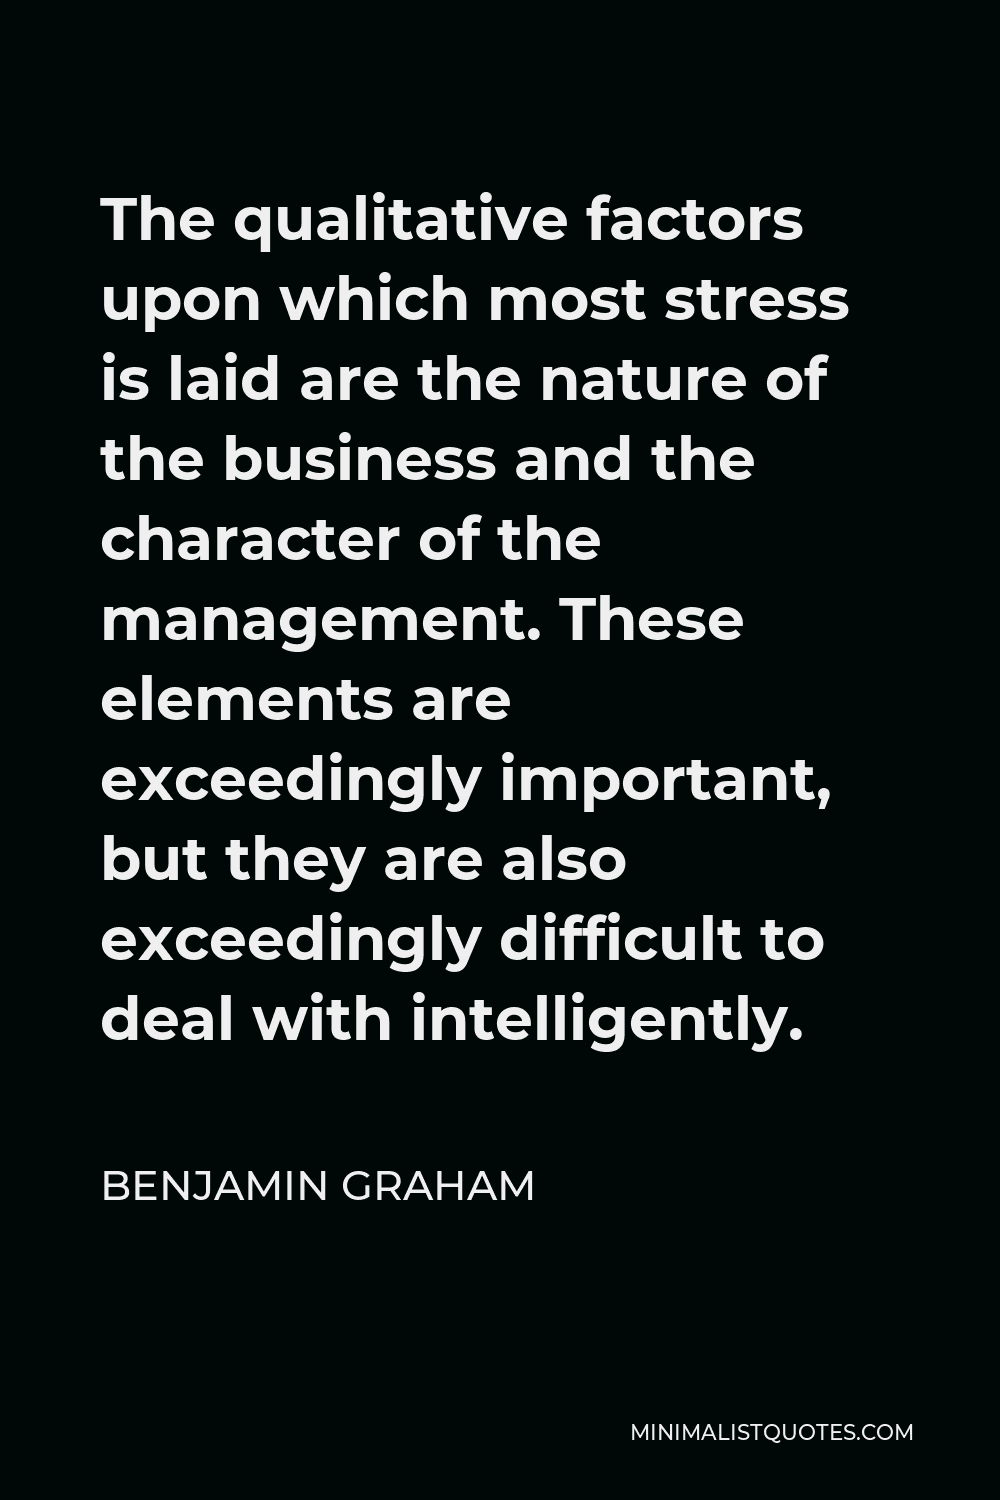 Benjamin Graham Quote - The qualitative factors upon which most stress is laid are the nature of the business and the character of the management. These elements are exceedingly important, but they are also exceedingly difficult to deal with intelligently.